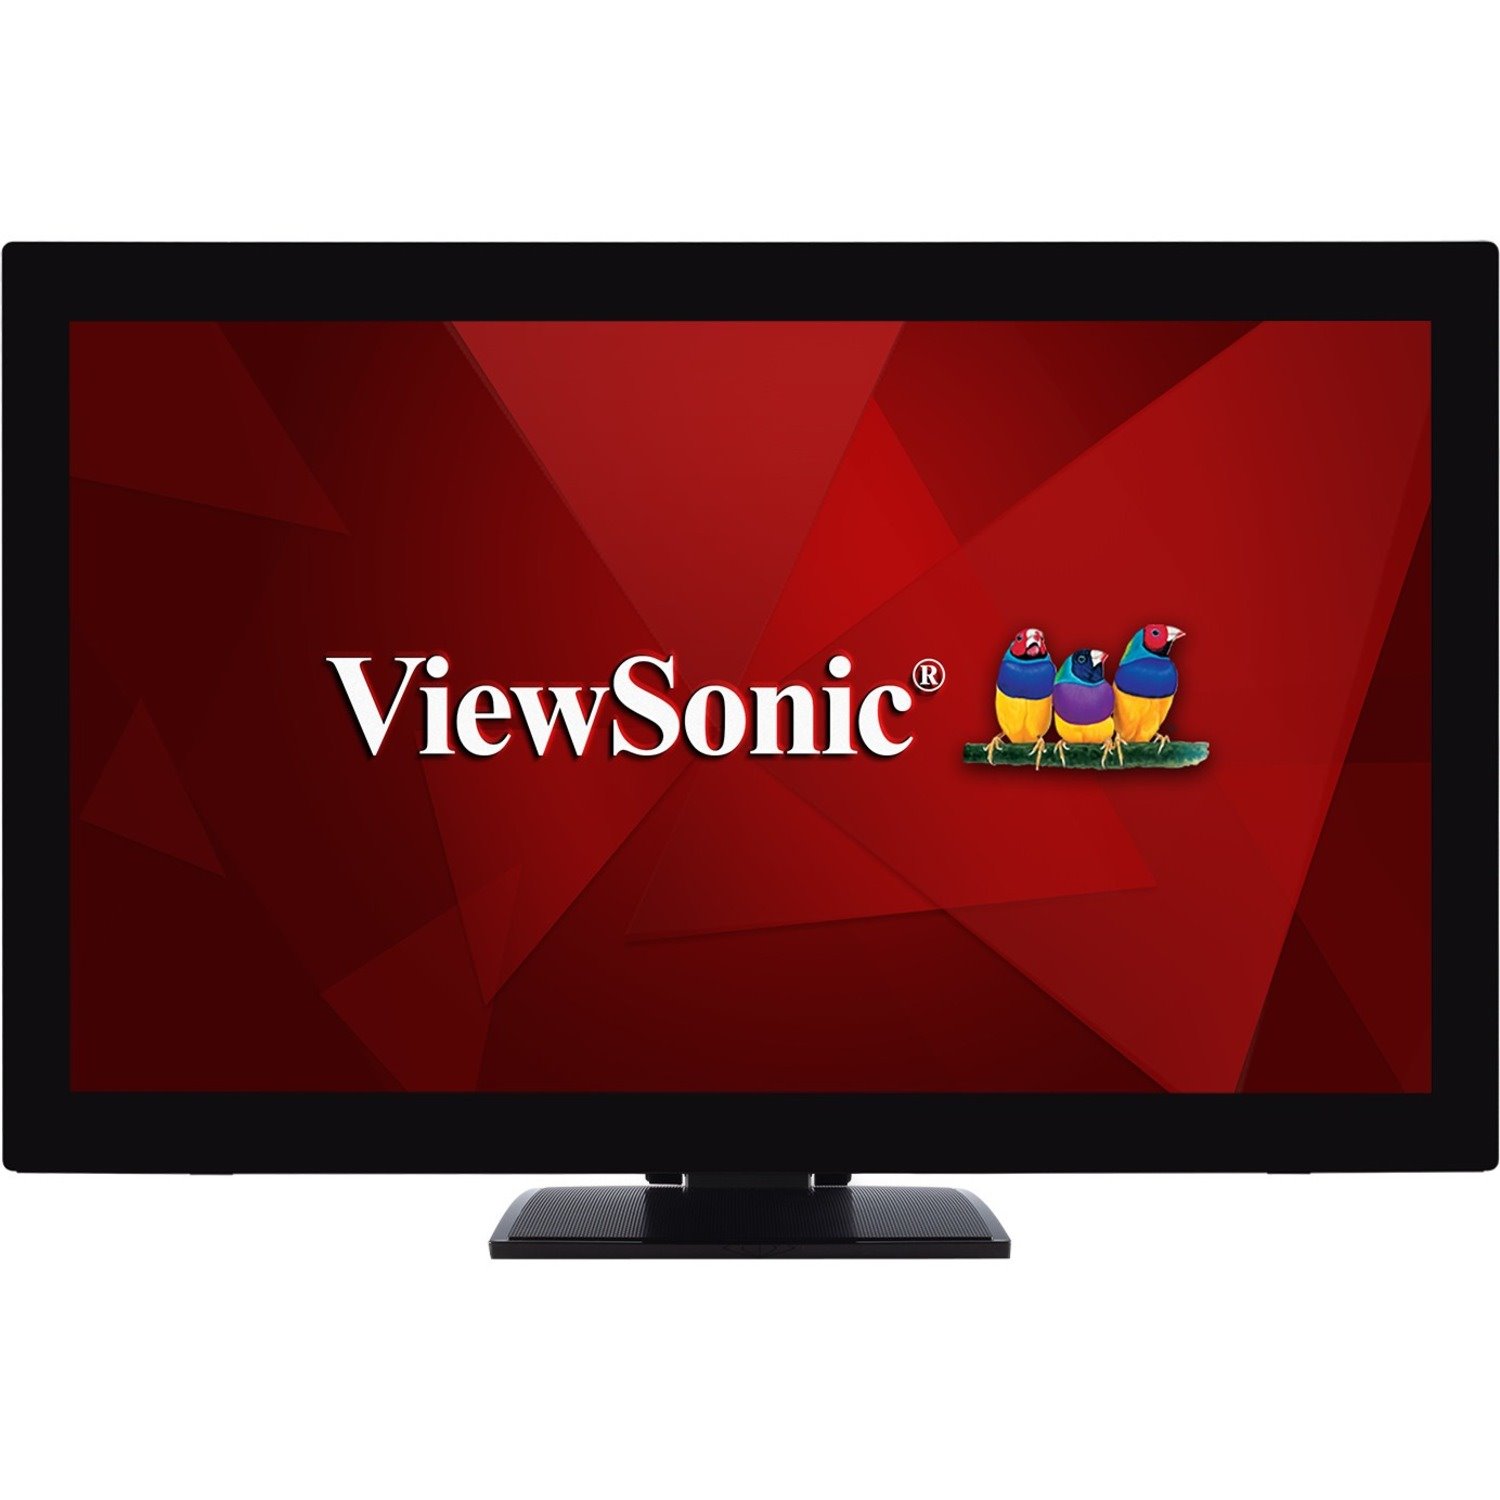 ViewSonic TD2760 68.6 cm (27") LCD Touchscreen Monitor - 16:9 - 6 ms with OD